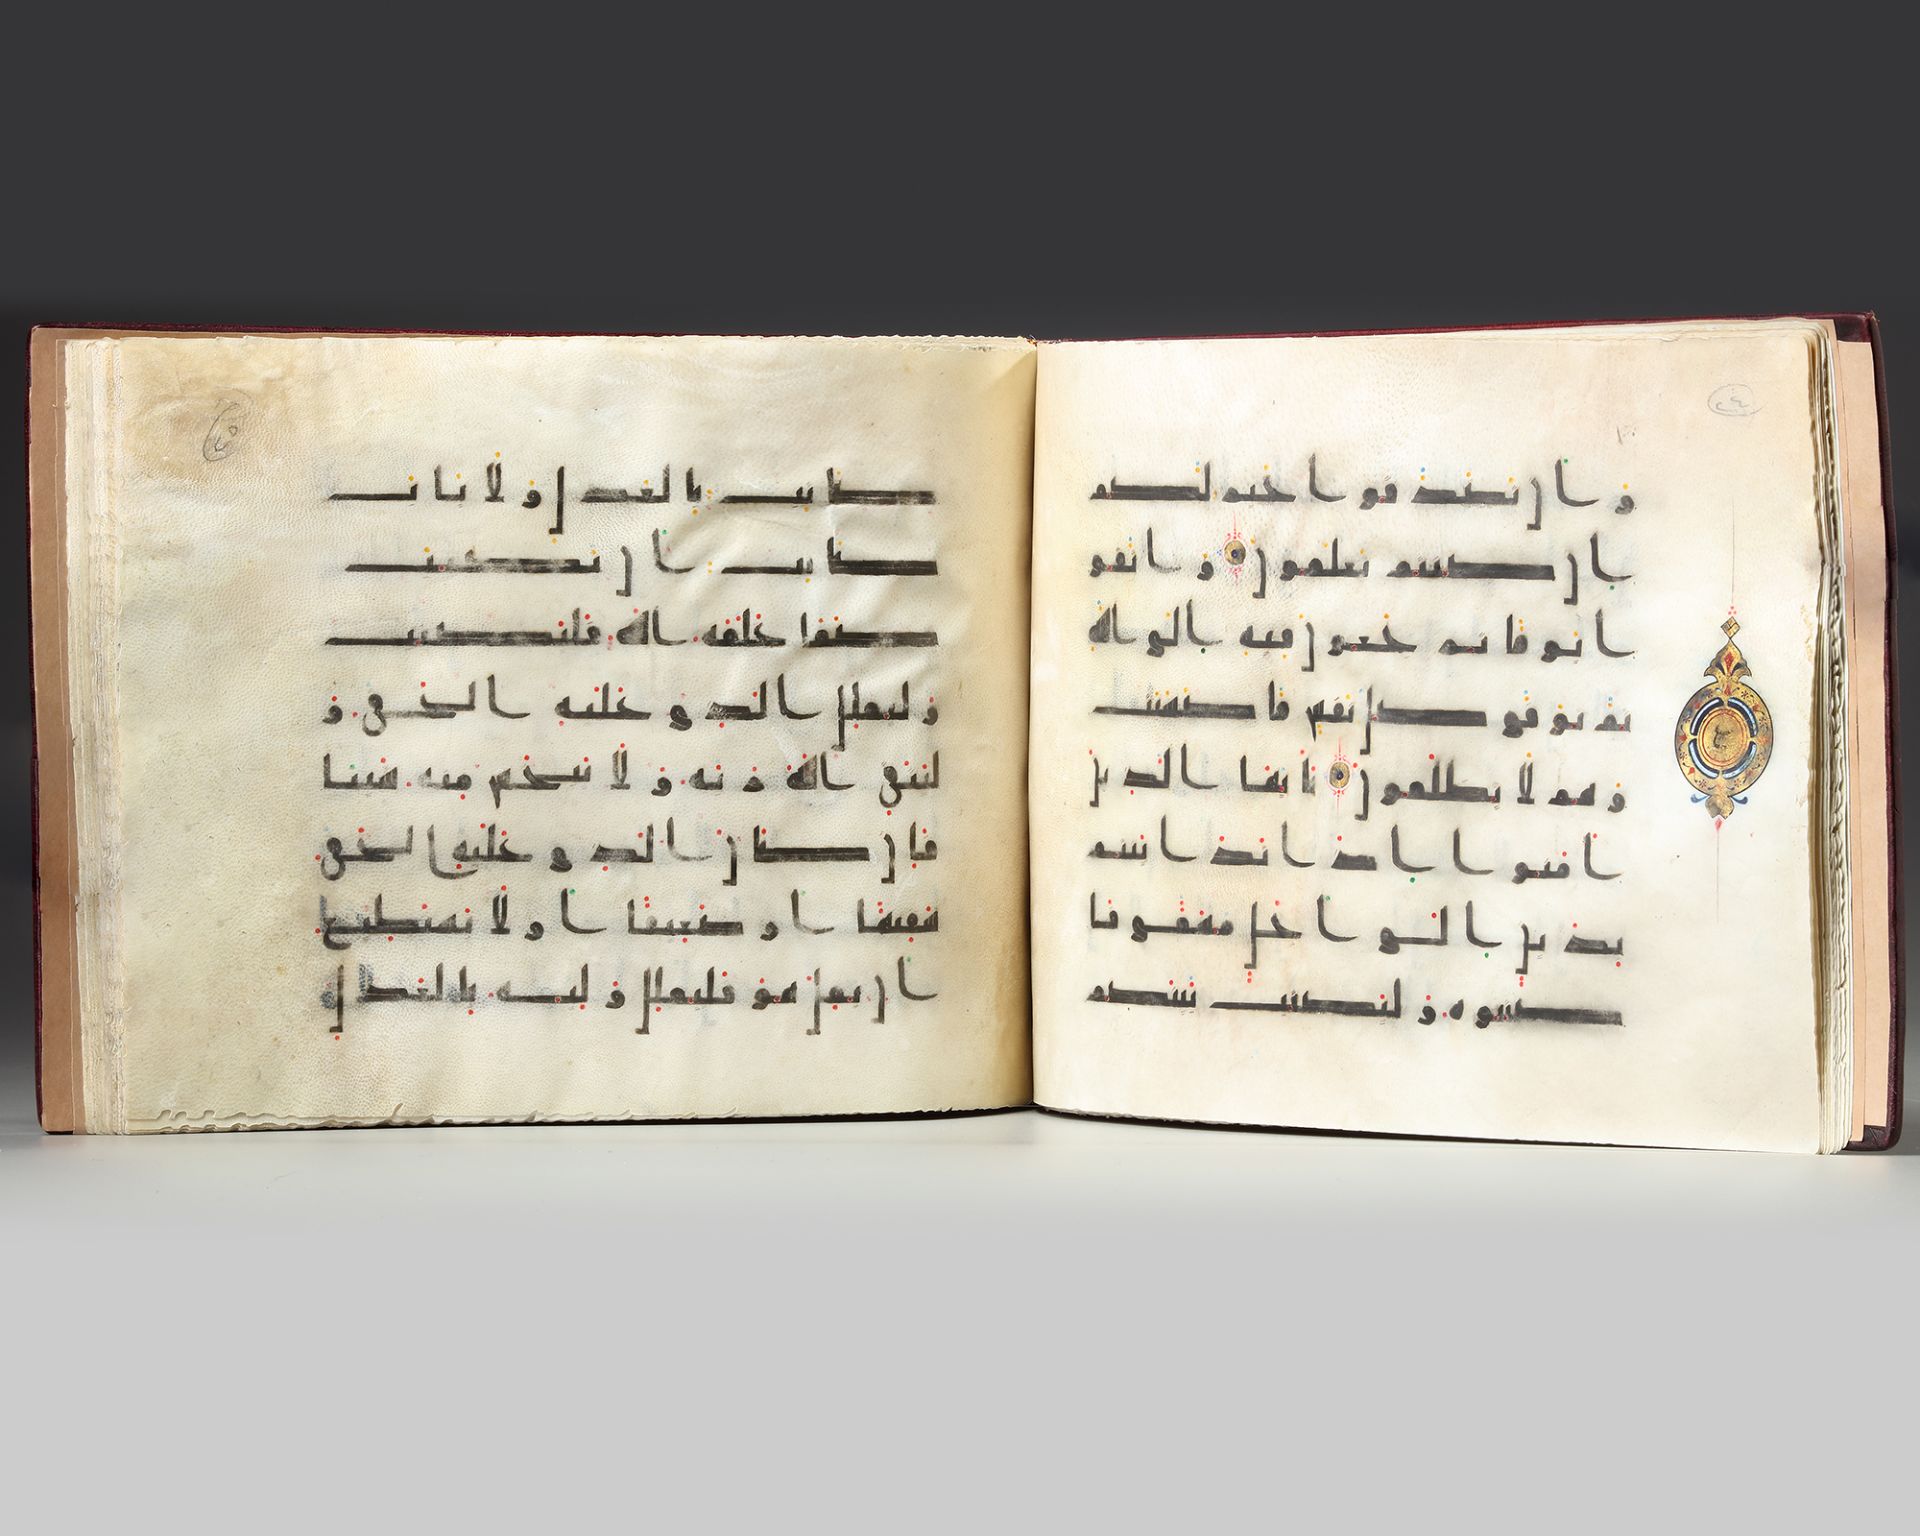 AN OTTOMAN BOOK WITH ISLAMIC CALLIGRAPY - Image 2 of 4